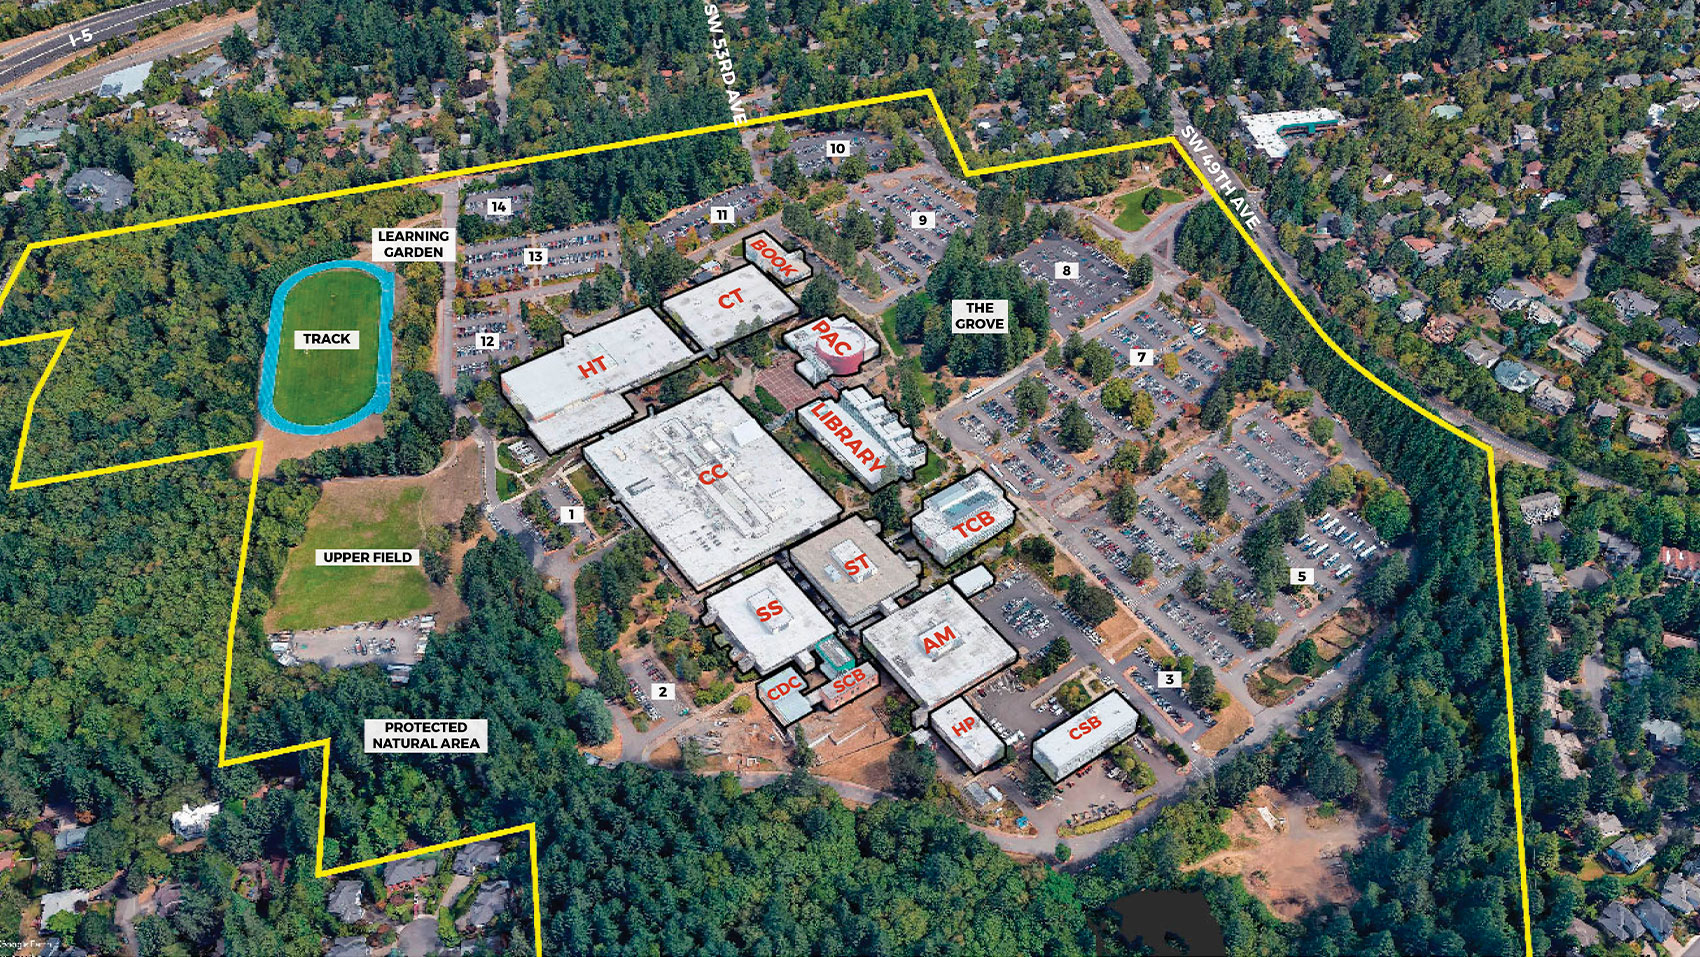 Existing Campus|An aerial photograph view looking down at the Sylvania Campus from a southern angle, showing the surrounding streets and neighborhoods. Southwest 49th Avenue is visible at the top right, and I-5 is visible in the top left. The campus buildings are in the center of the view, outlined in white and labeled in red. The forest is labeled “protected natural area”. The Grove, learning garden, track, upper field, and parking lots are labeled. A yellow line indicates the campus boundary. 